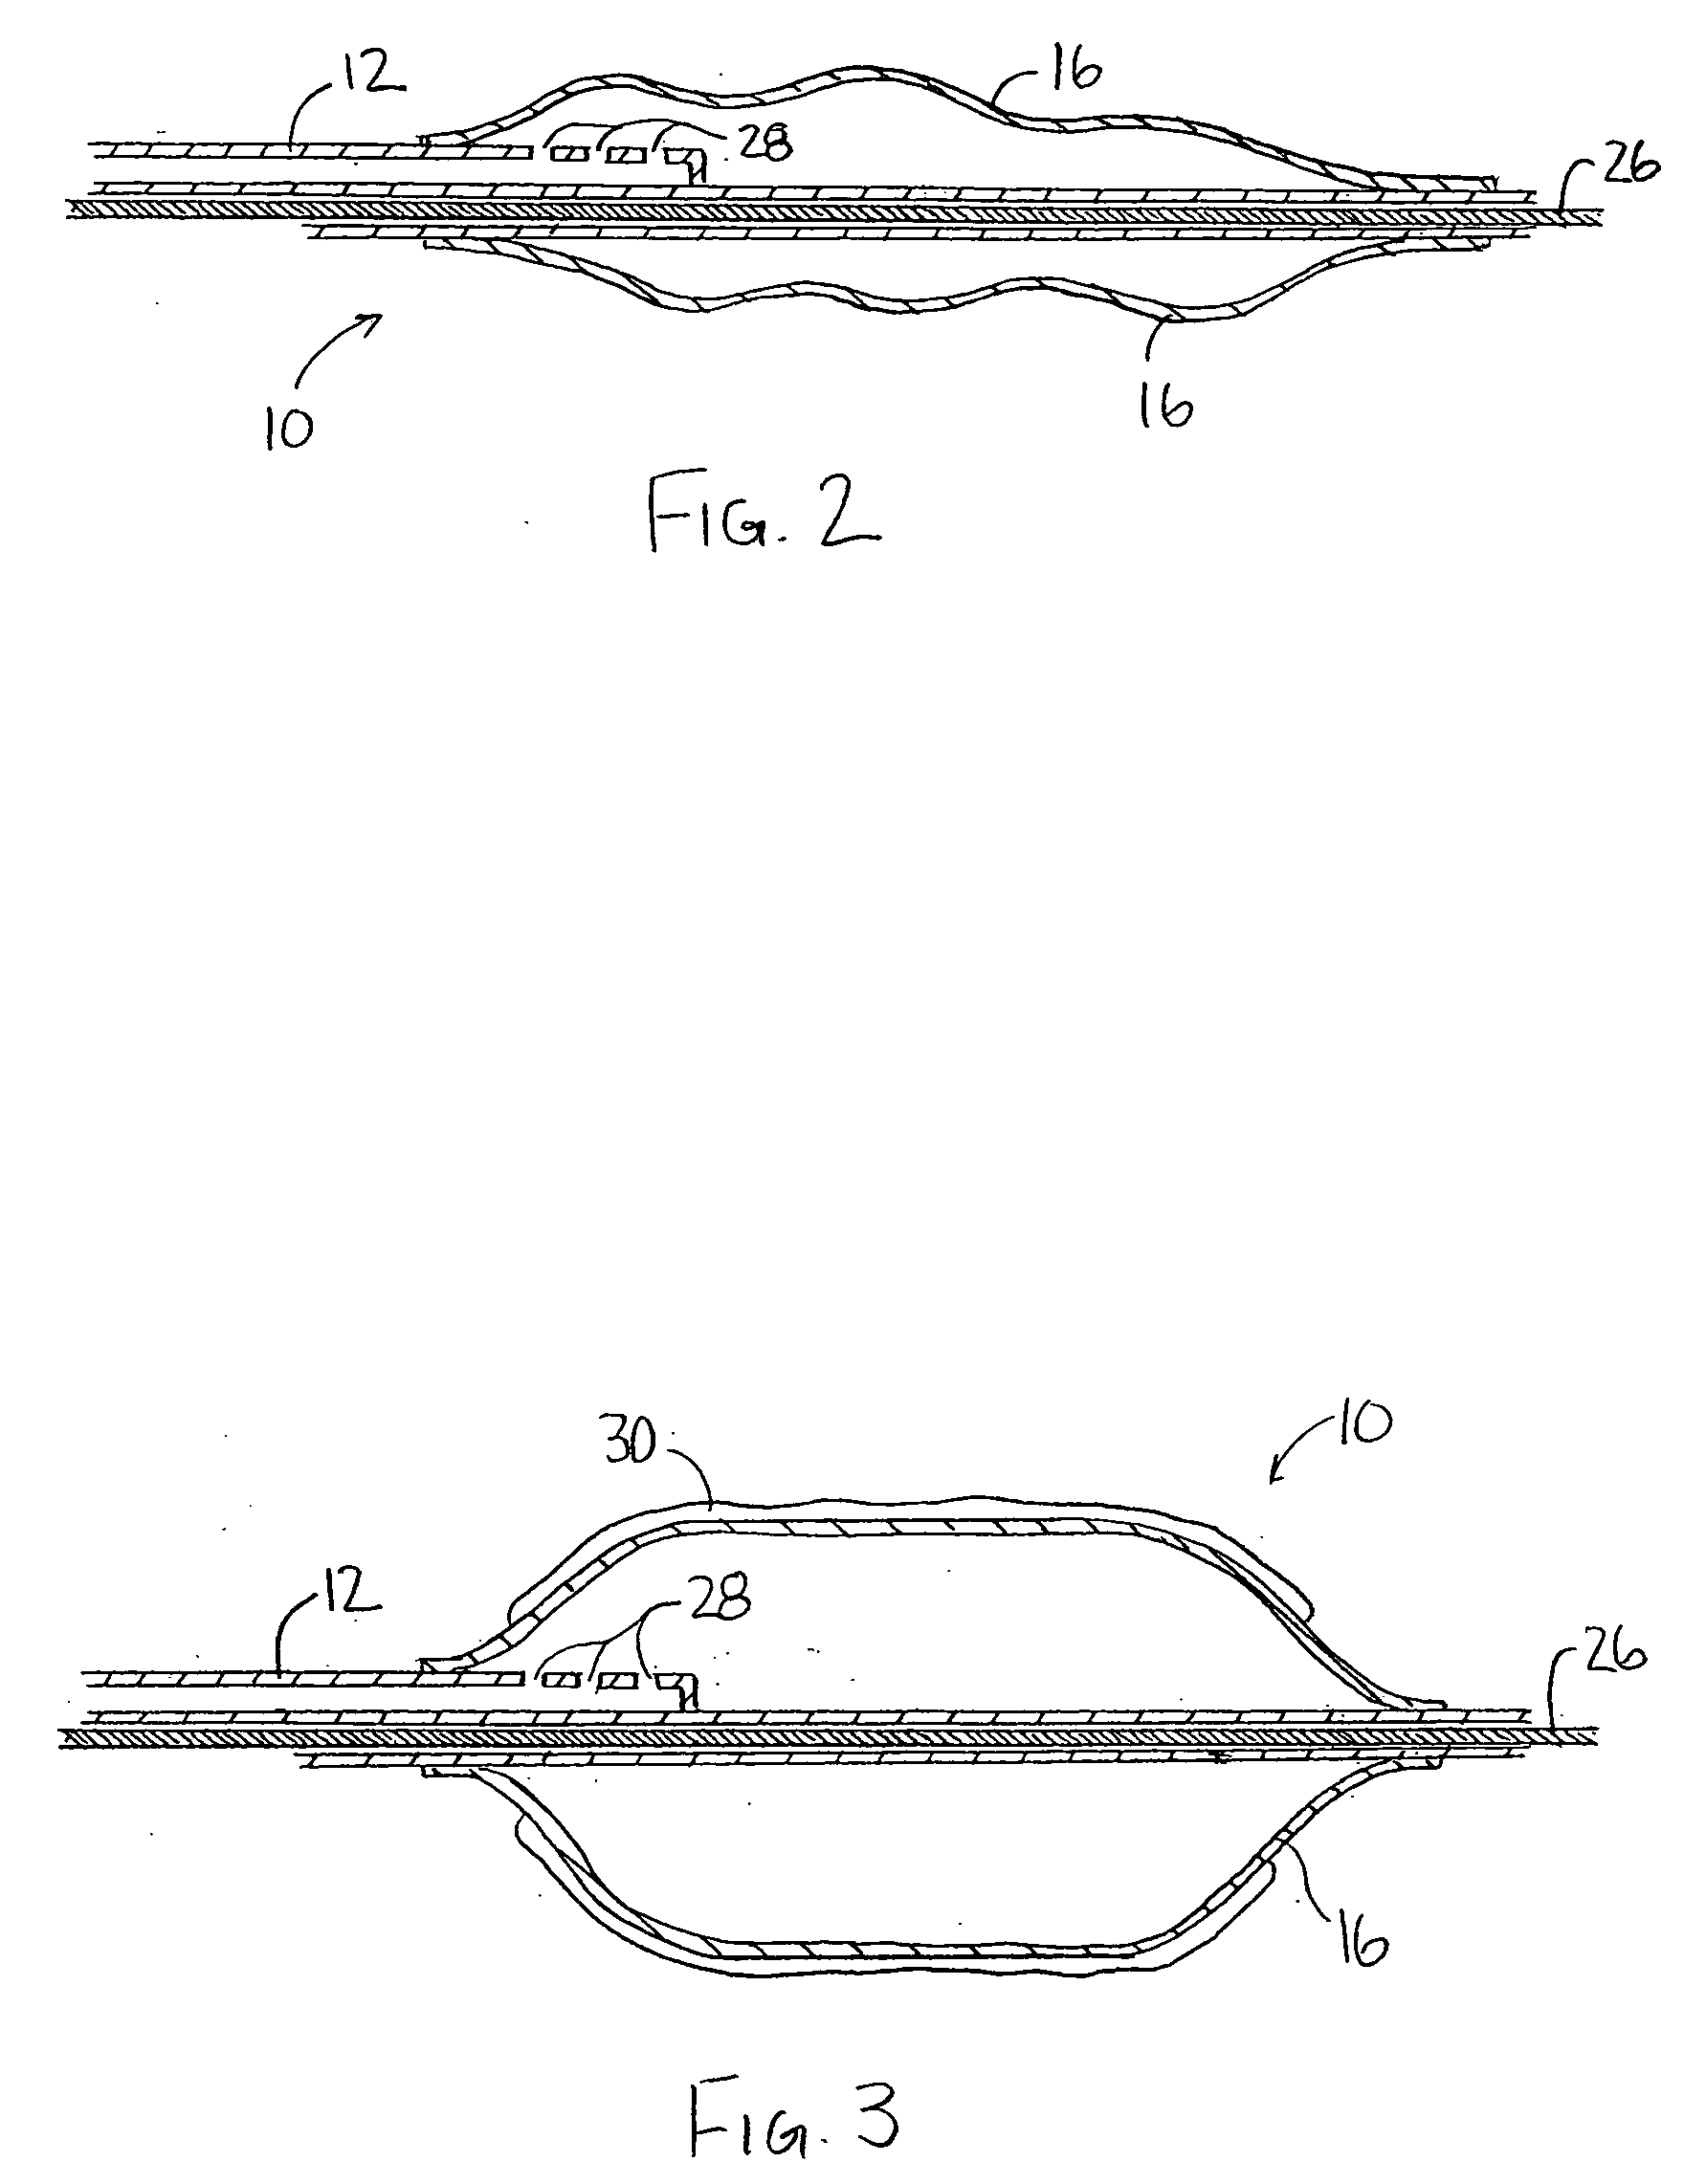 Application of a therapeutic substance to a tissue location using a porous medical device